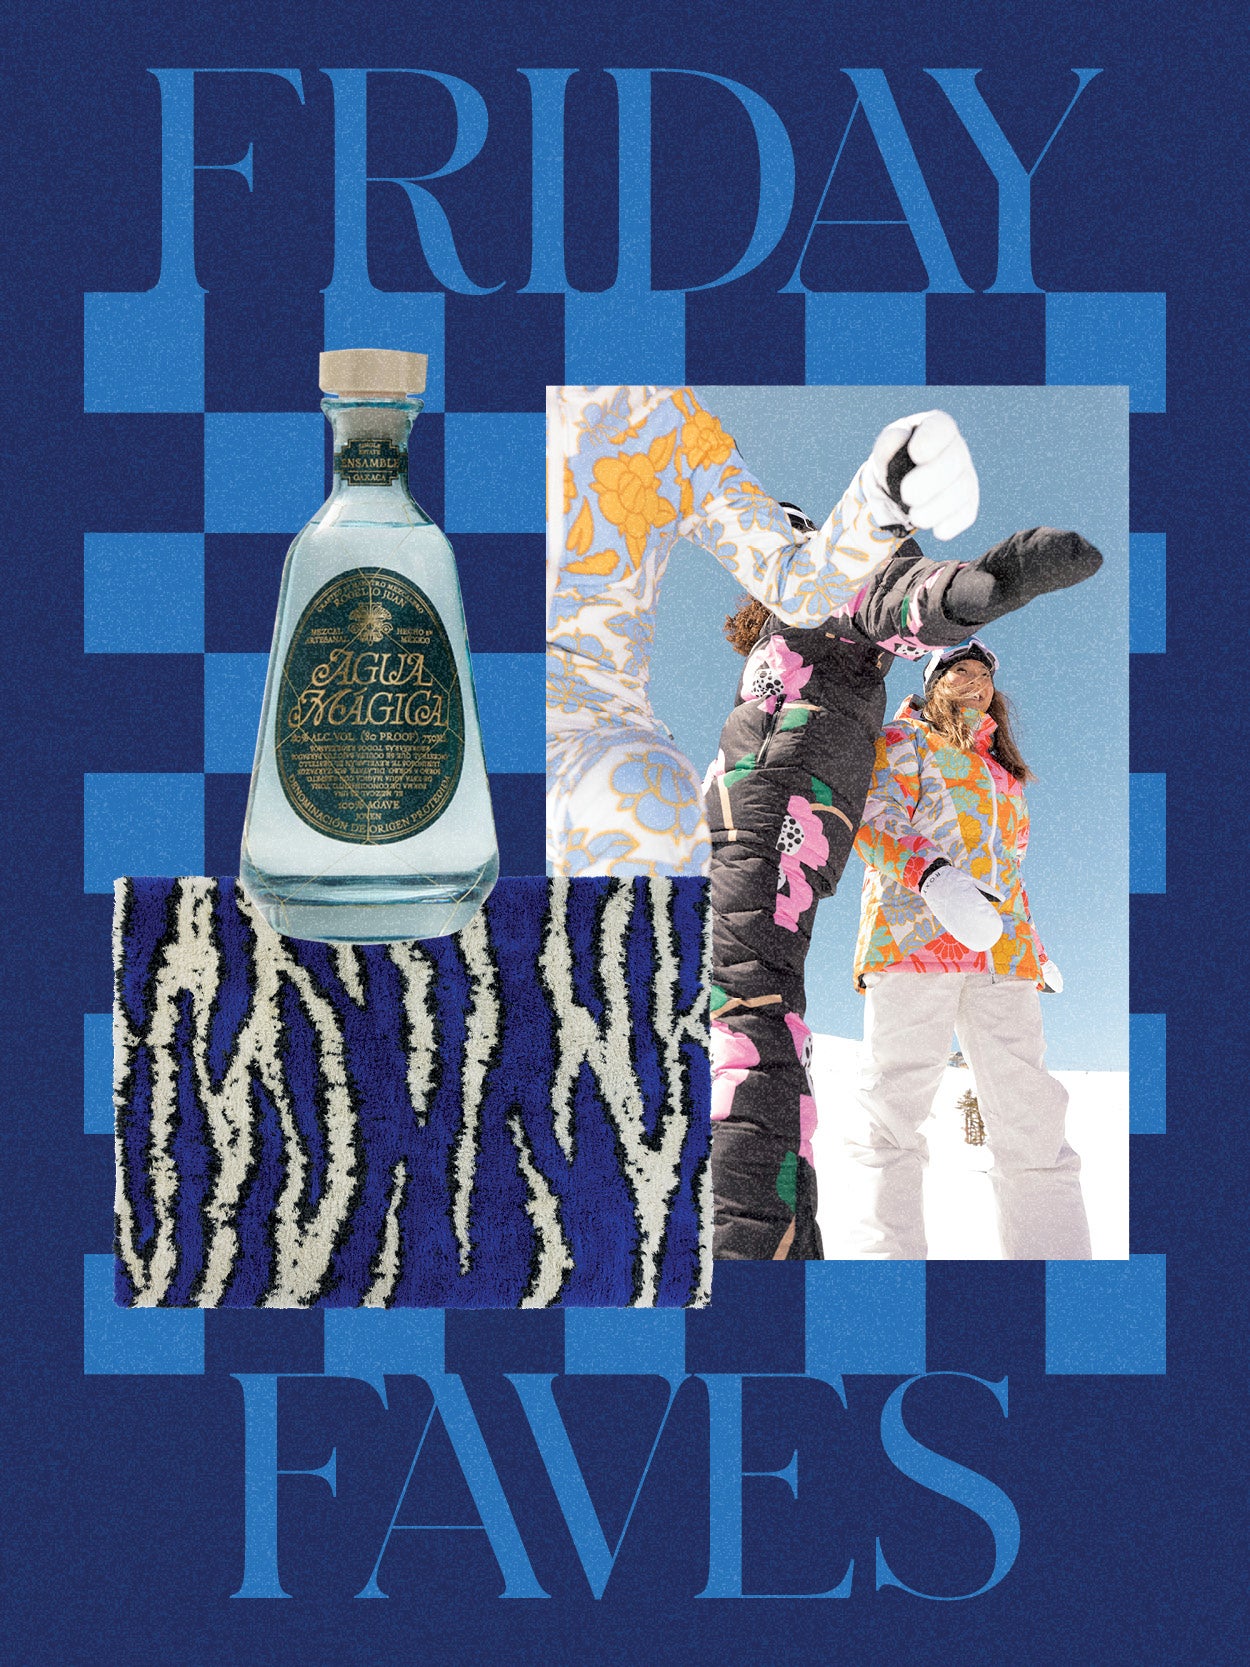 navy blue and lighter blue background, three images layout with mezcal glass bottle, a zebra patterned rug and snowboard attire